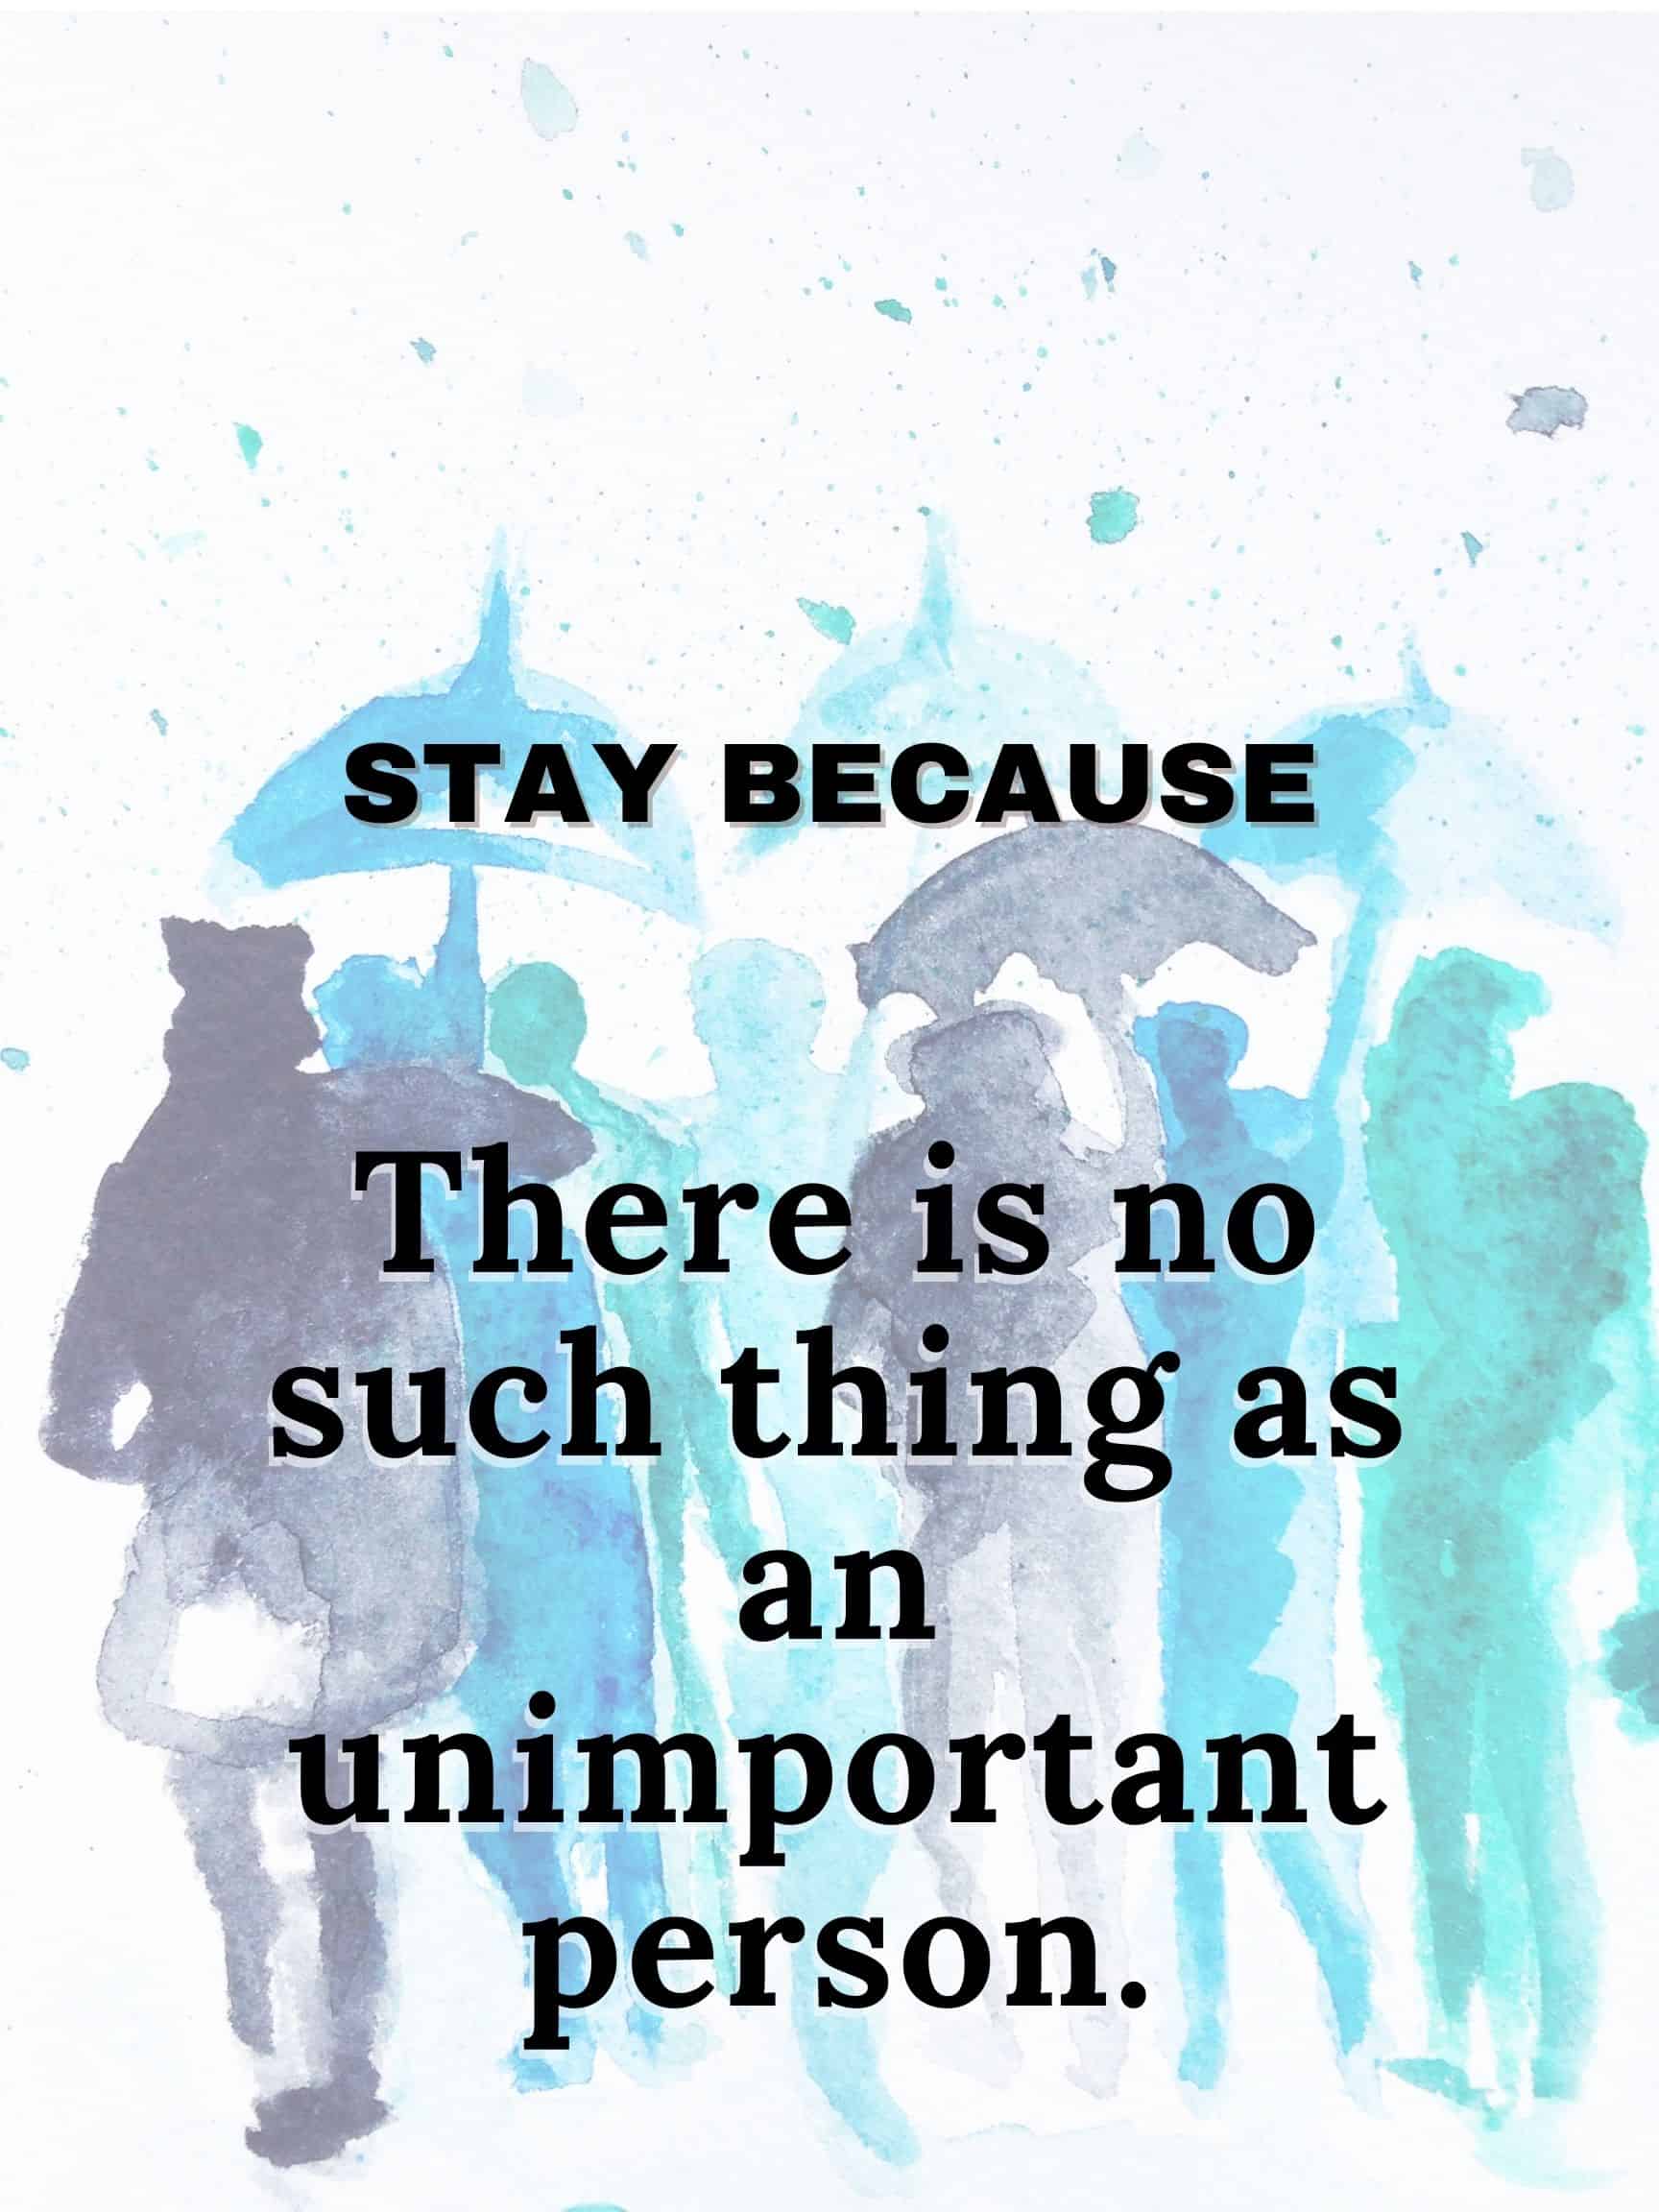 There is no such thing as an unimportant person #staybecause